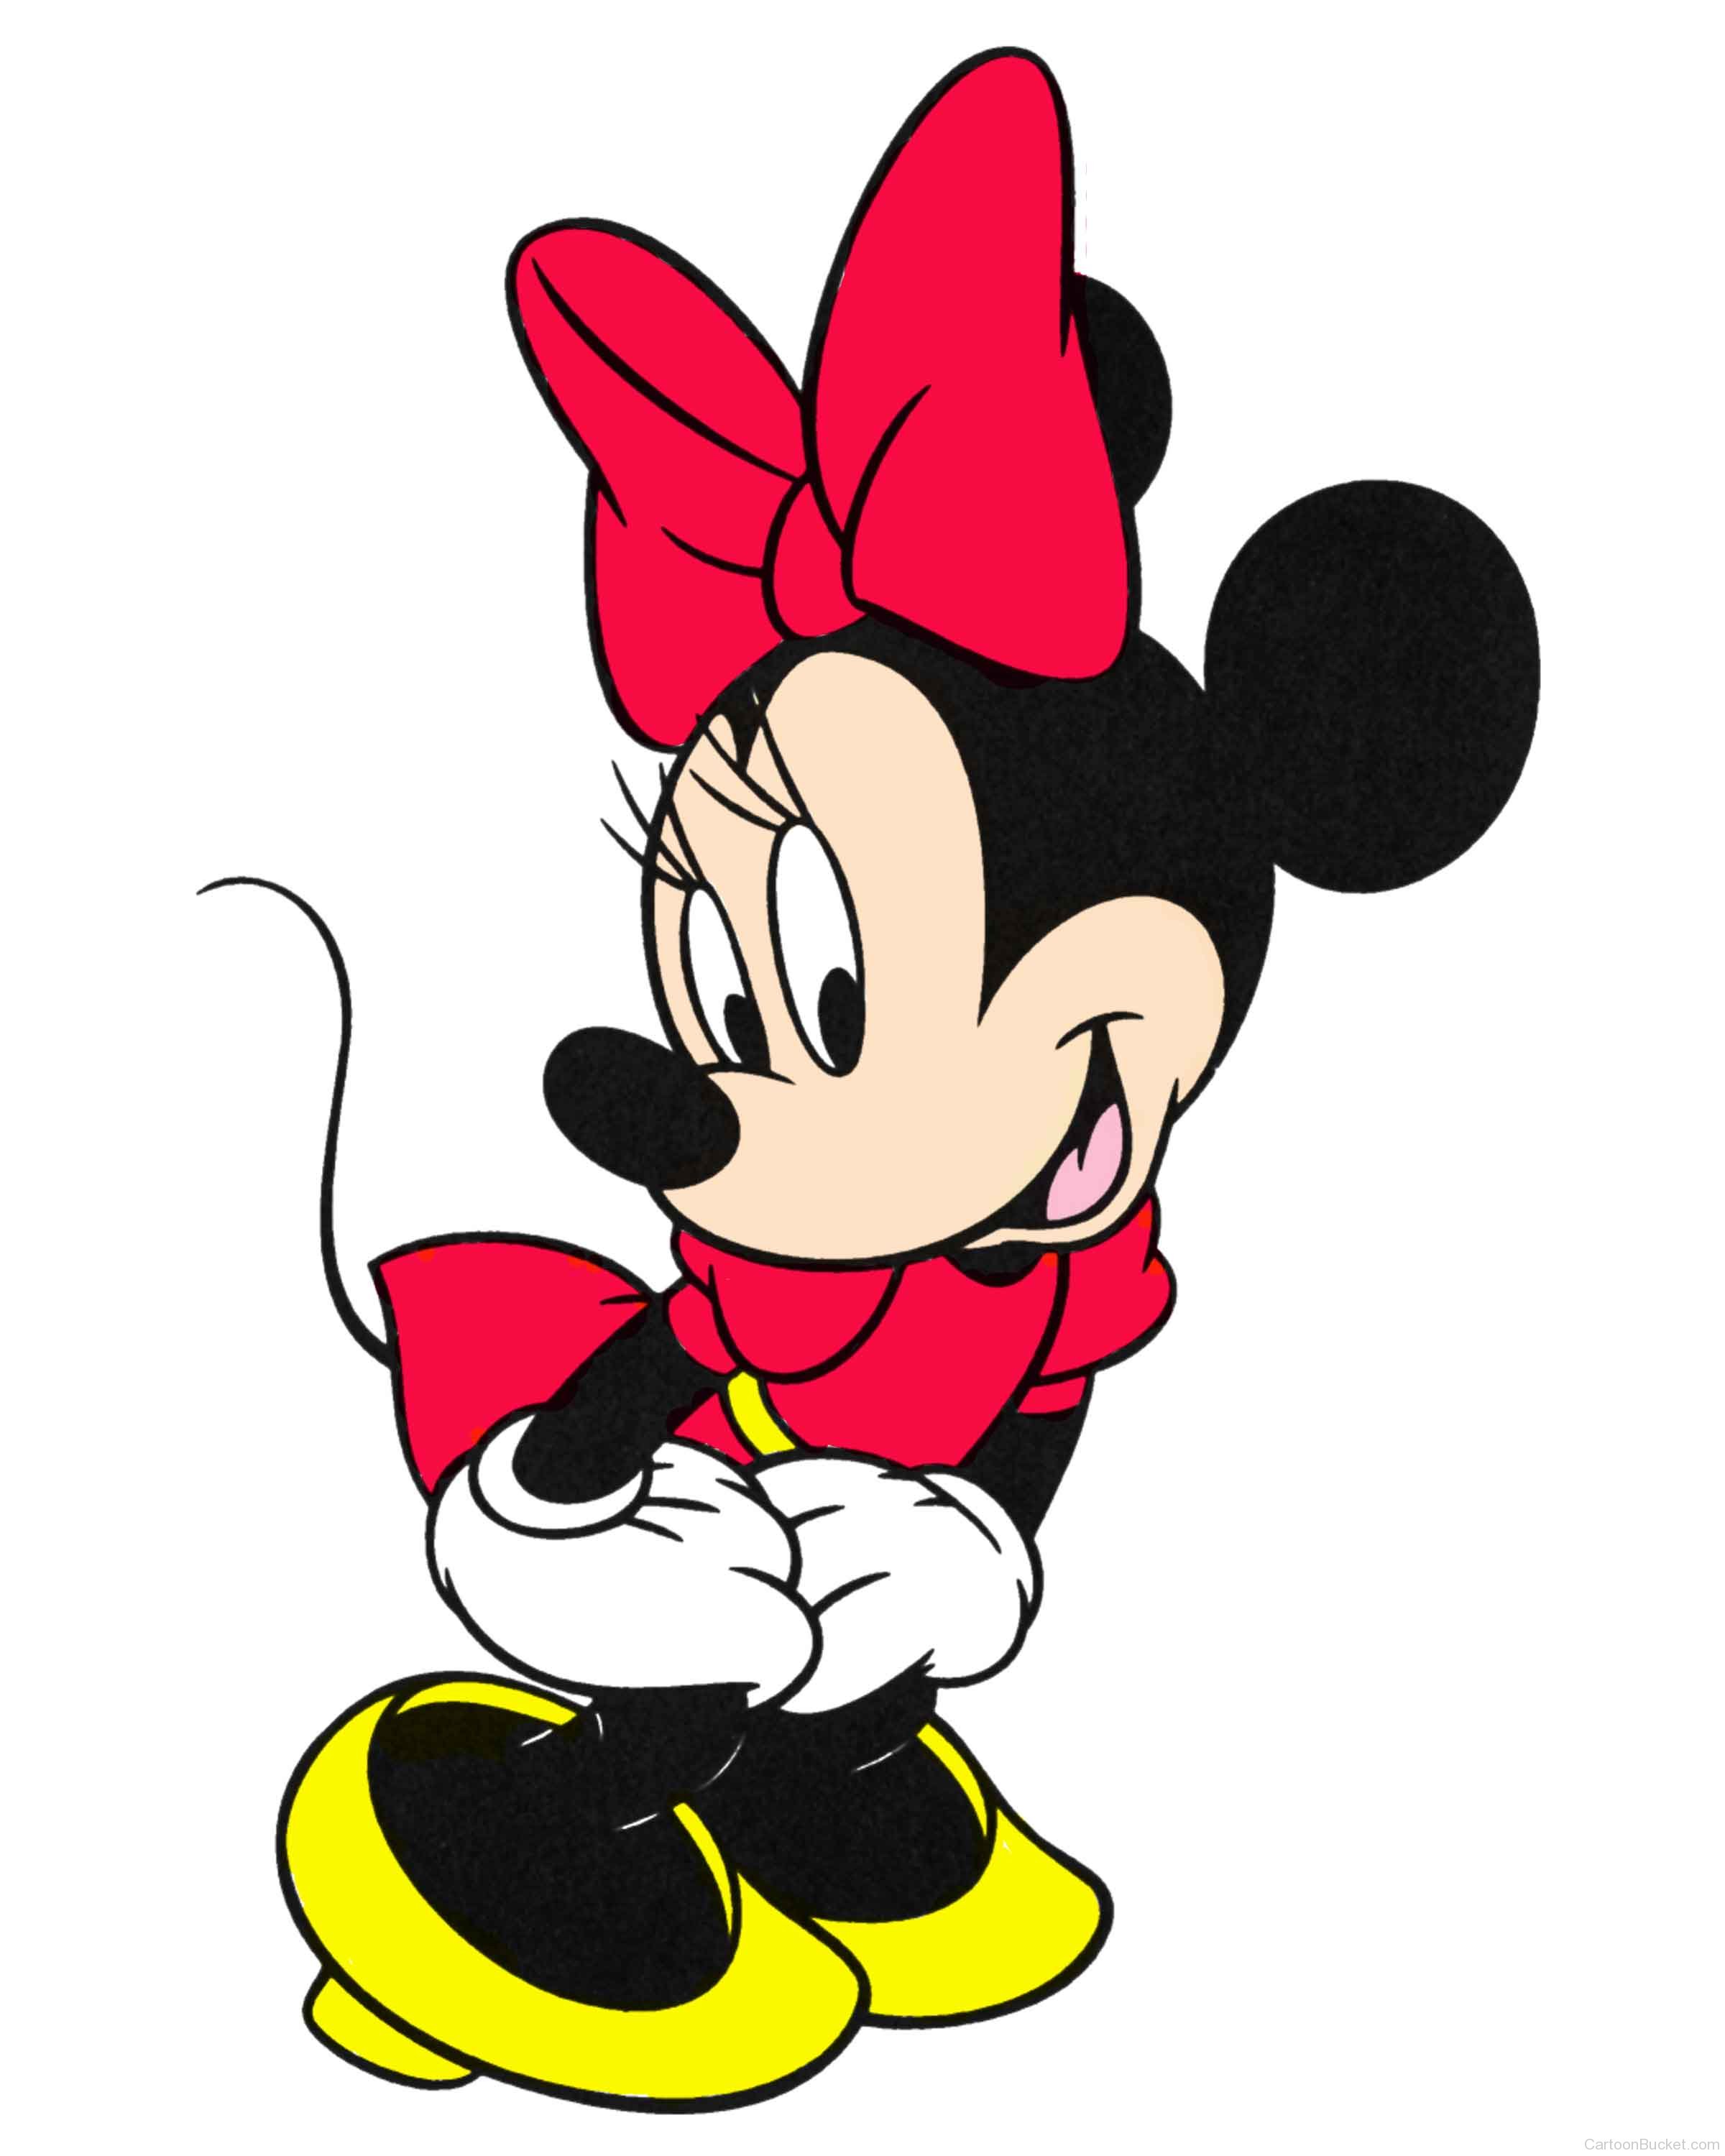 image-of-cute-minnie-mouse